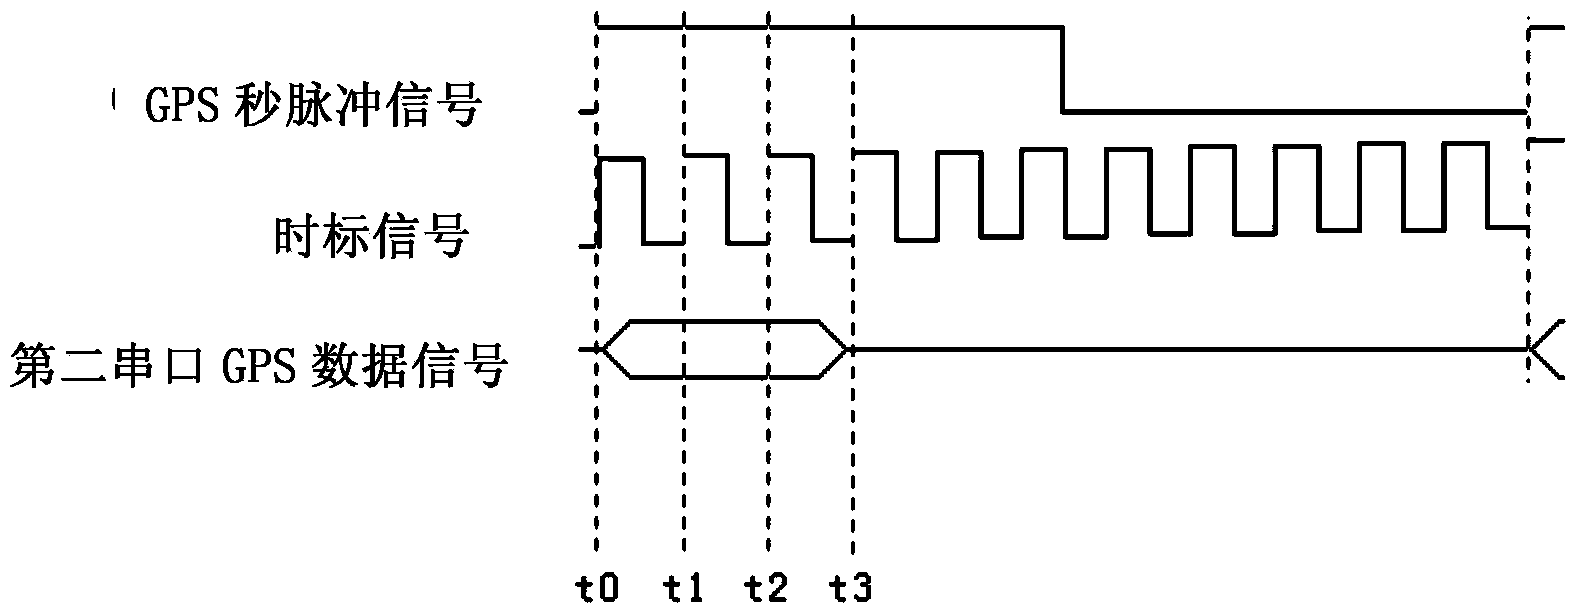 Time scale signal generator based on standard time pulse signals